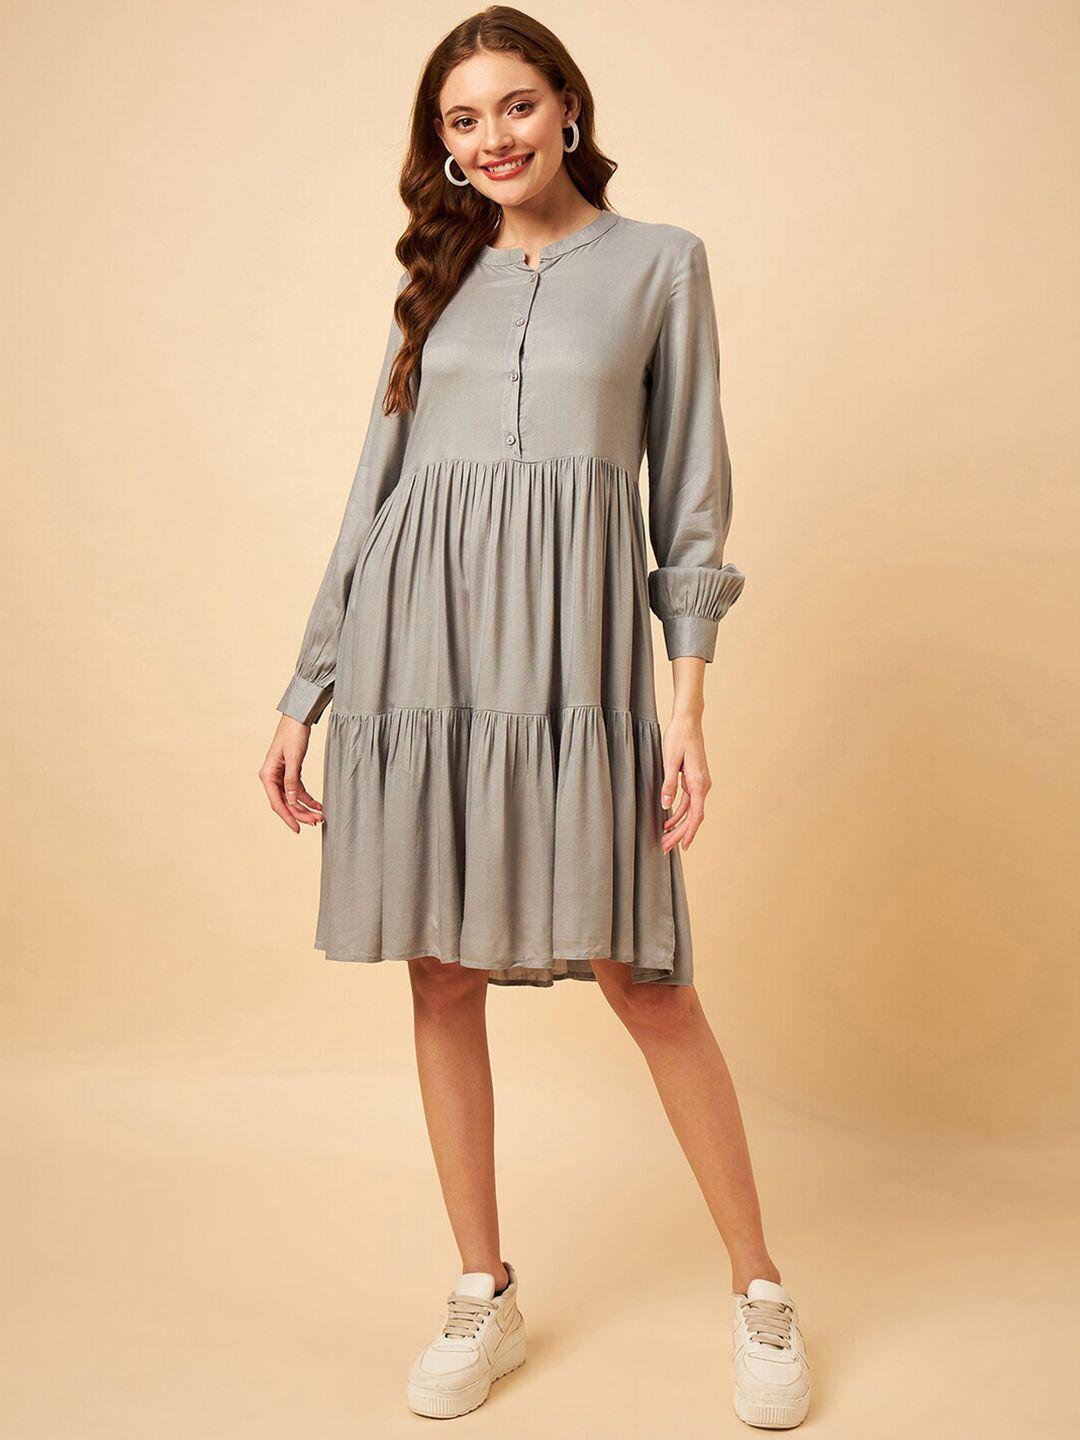 style blush mandarin collar tiered gathered fit and flare dress